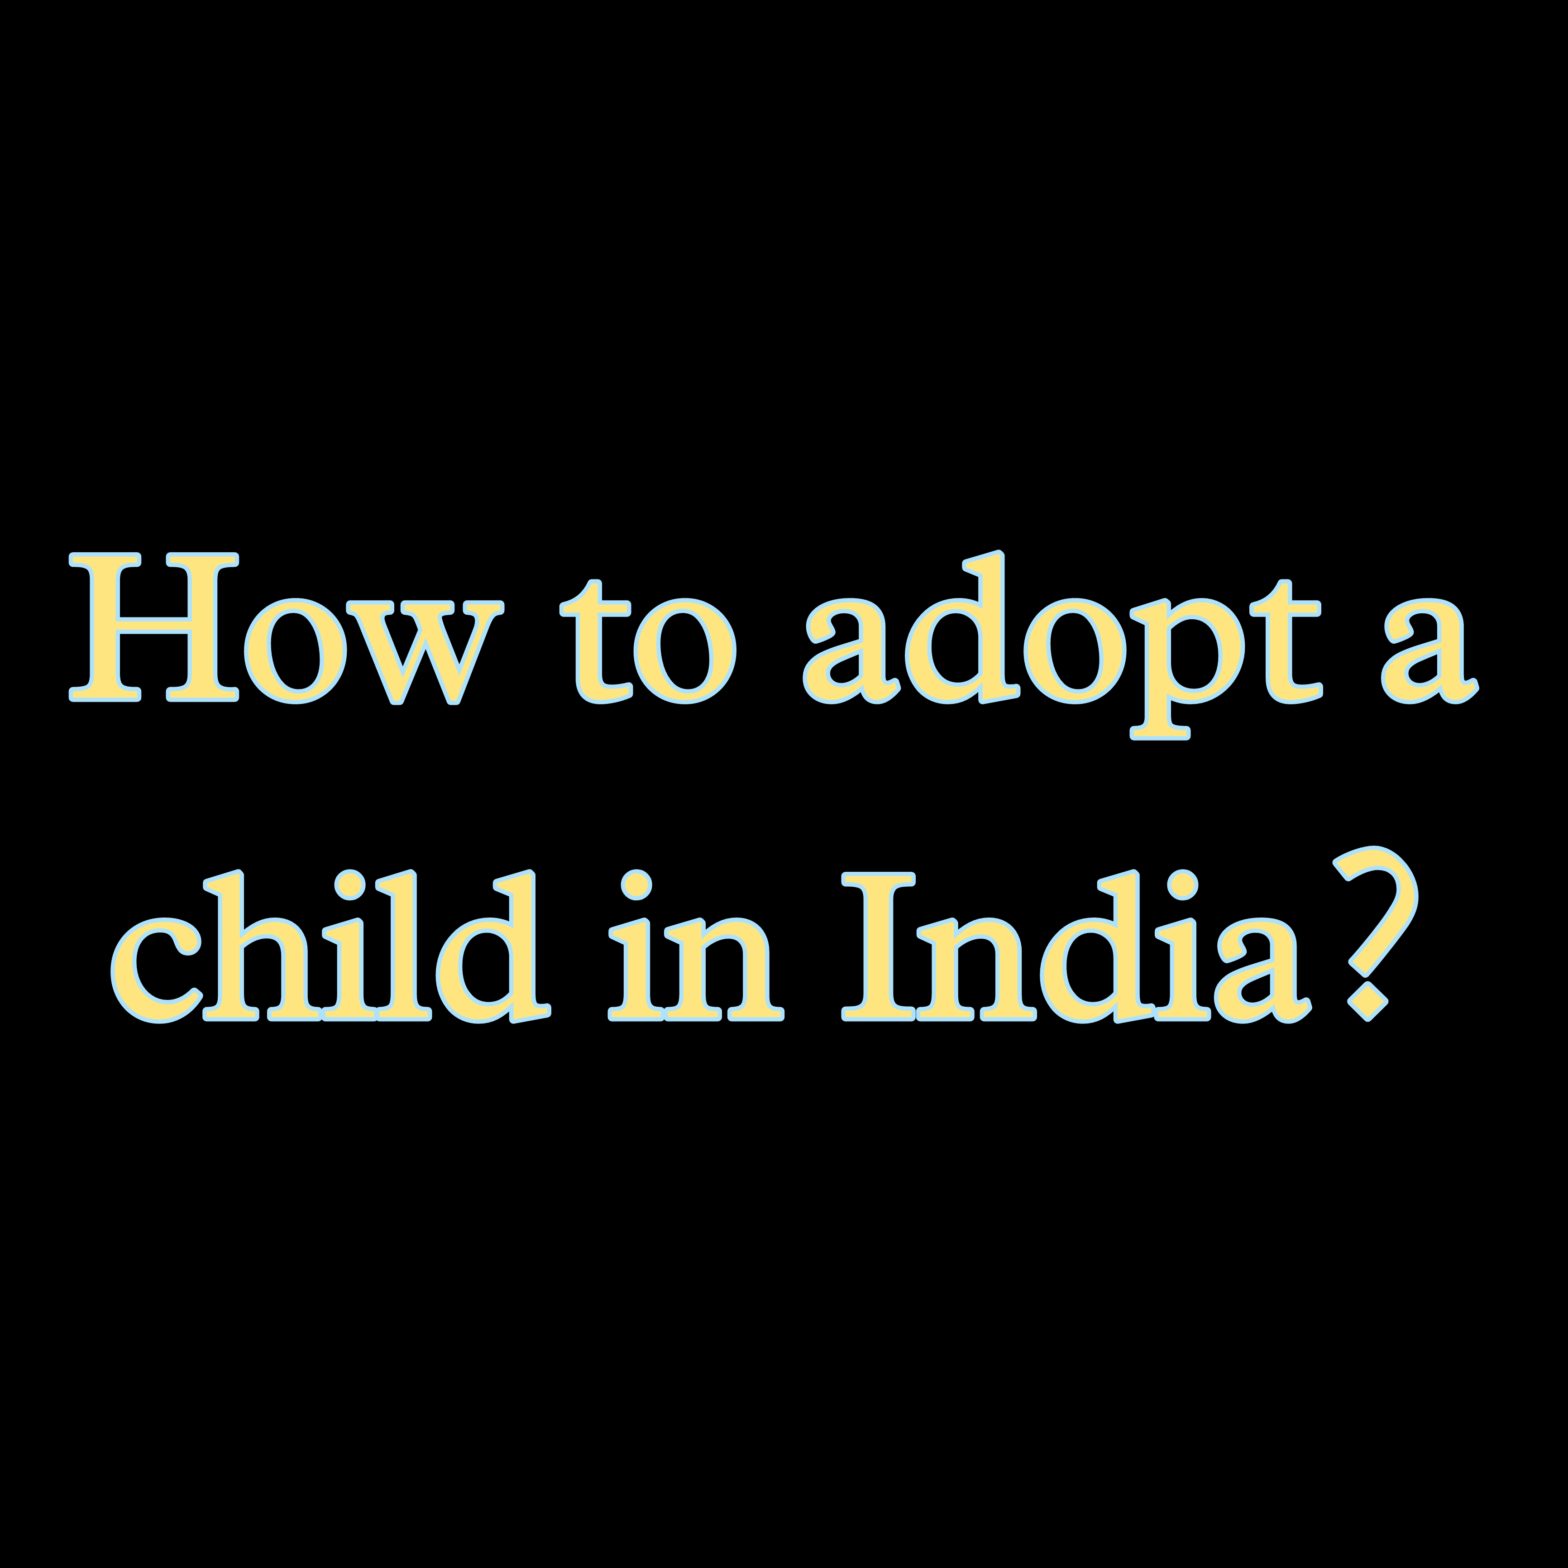 How to adopt a child in India?